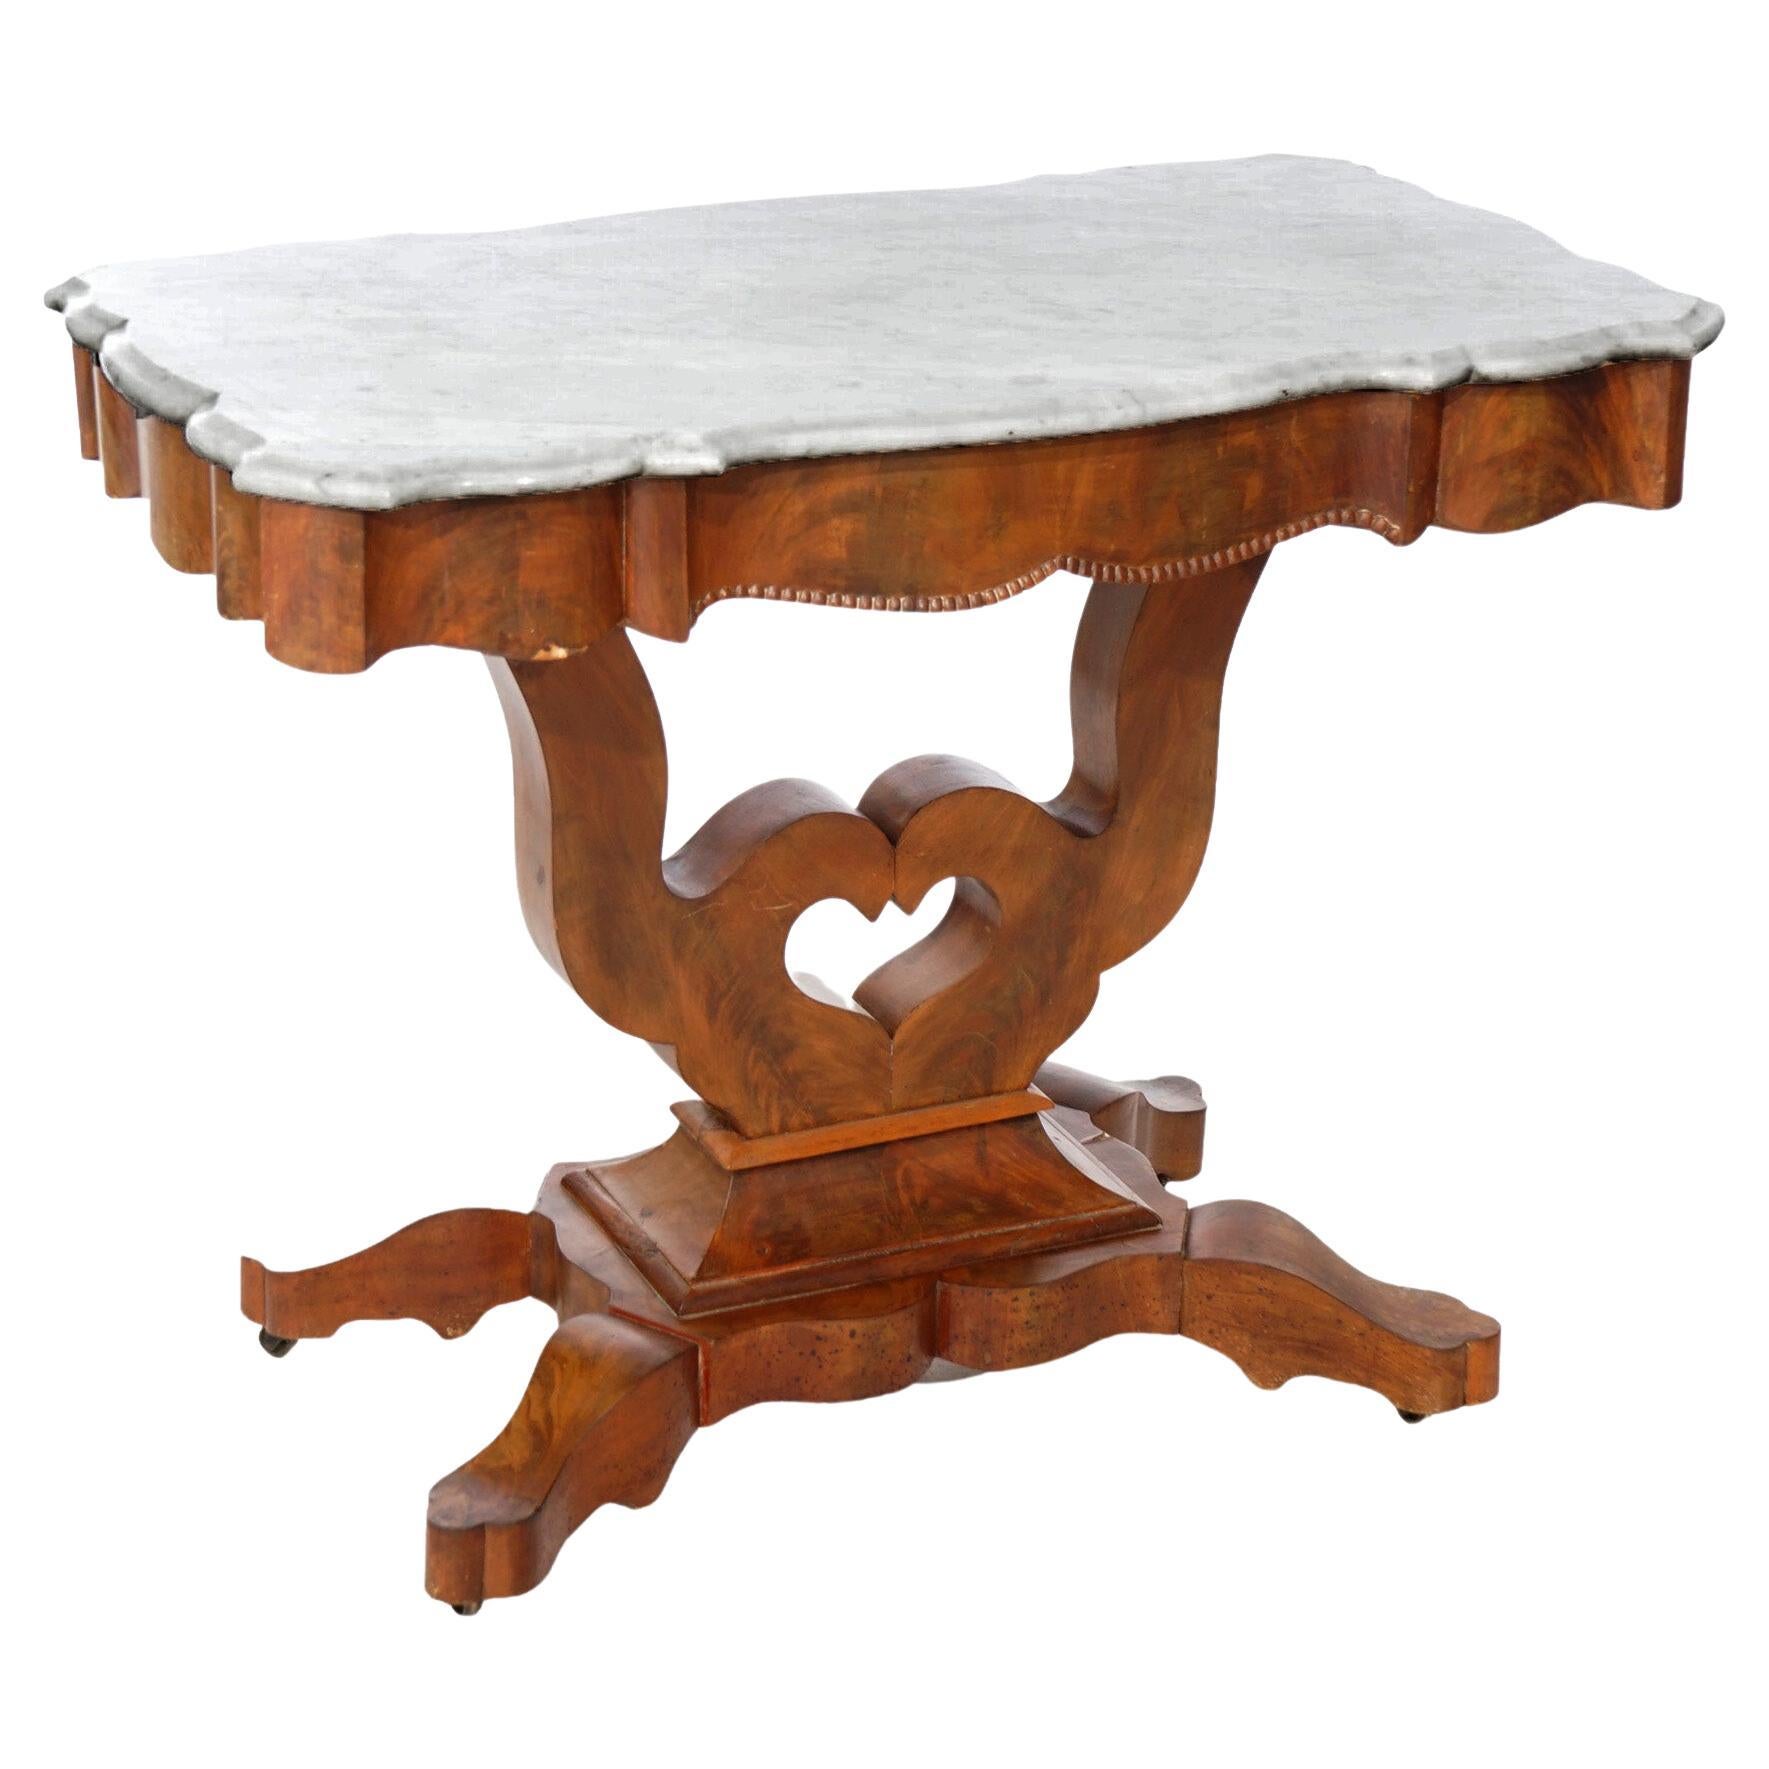 Antique Neoclassical Flame Mahogany & Marble Lyre Turtle Top Parlor Table c1880 For Sale